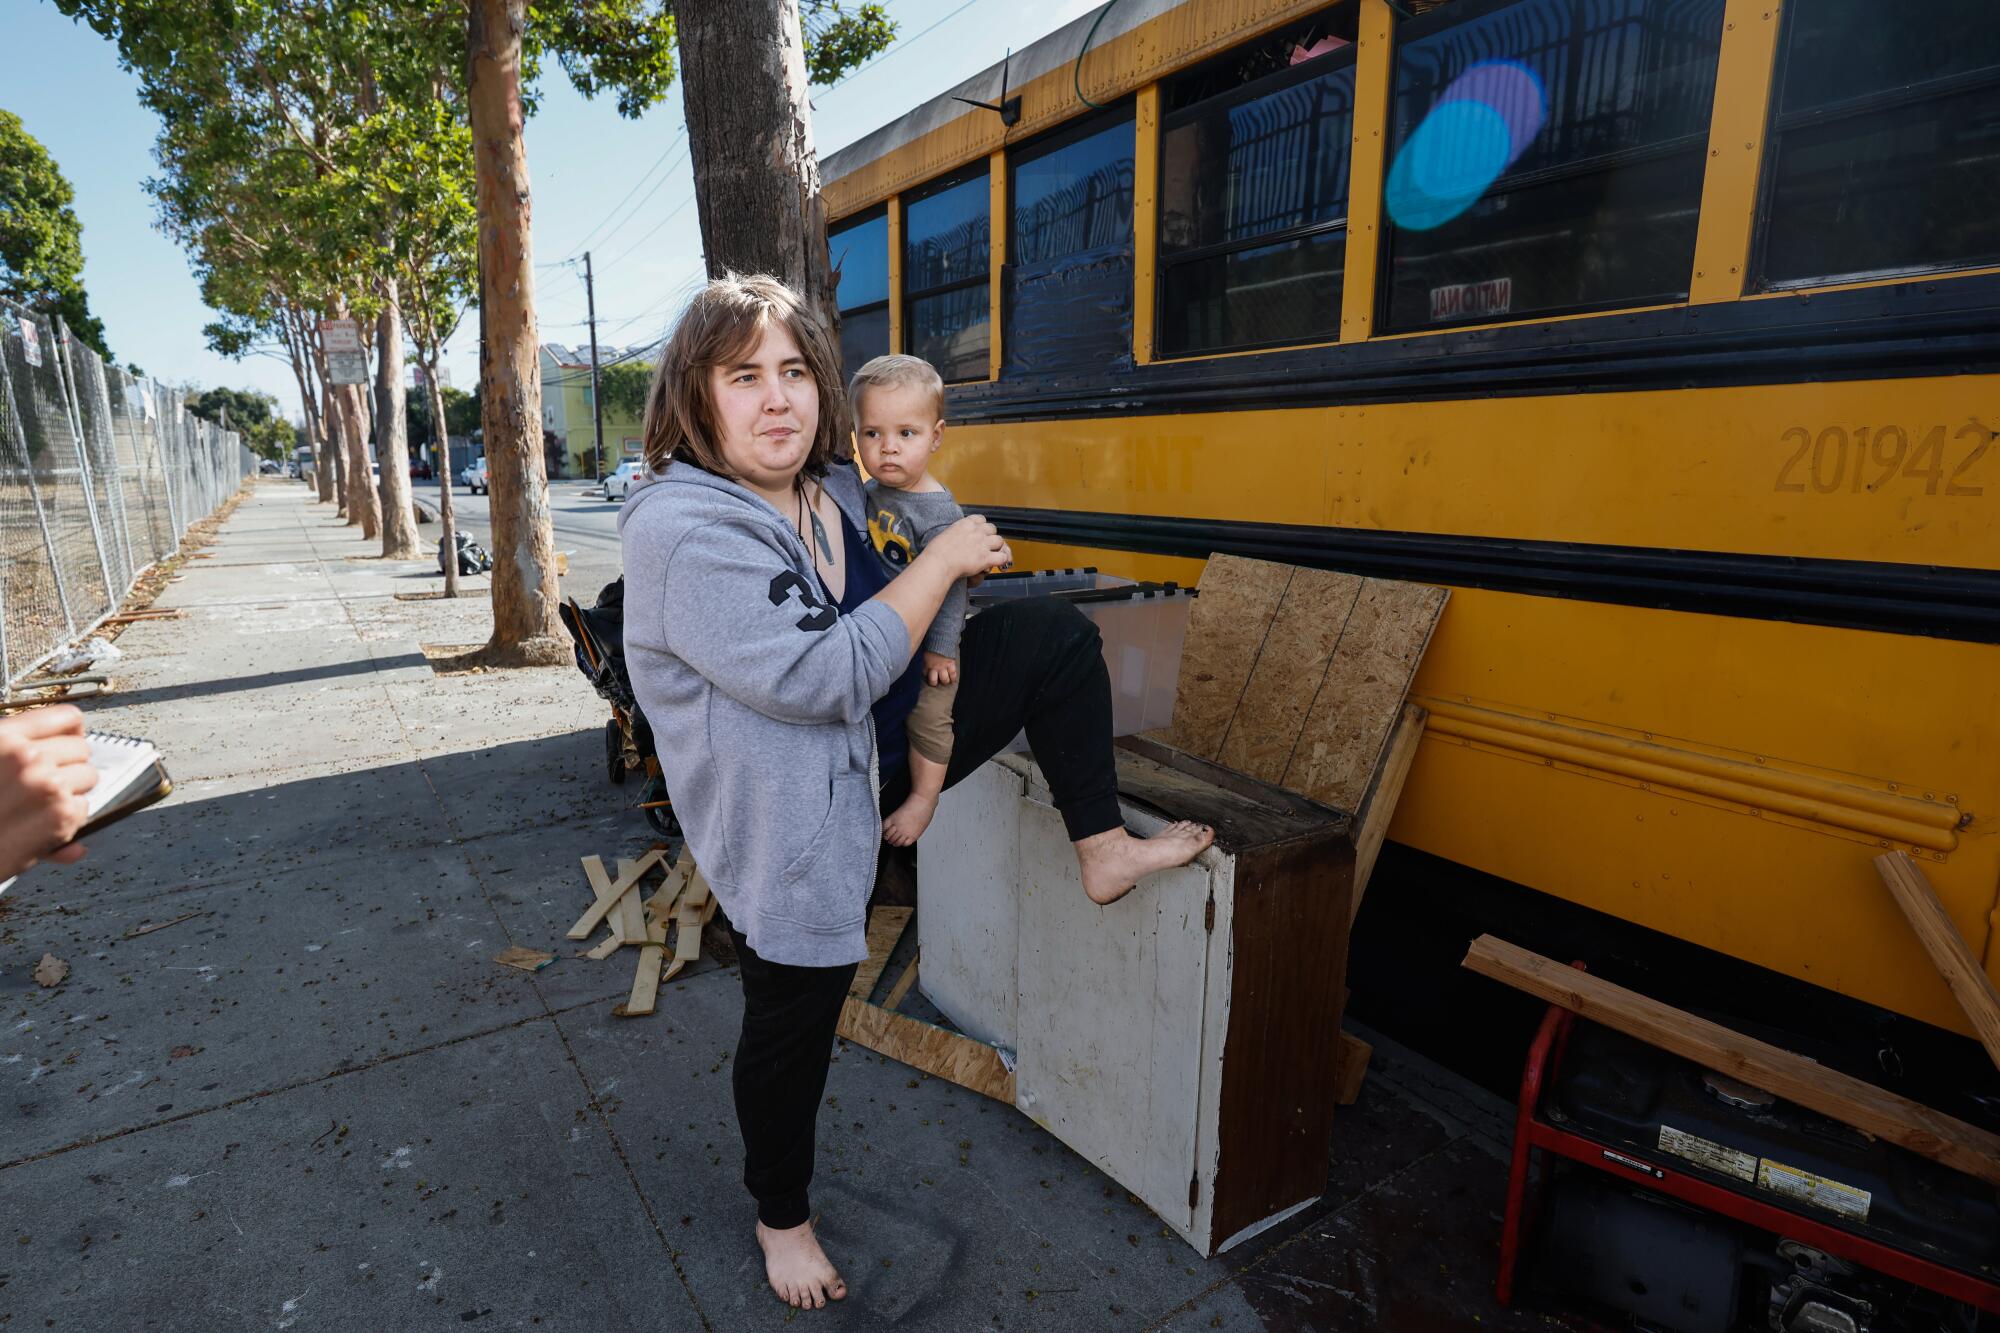 A woman holding an infant stands on a sidewalk beside a school bus